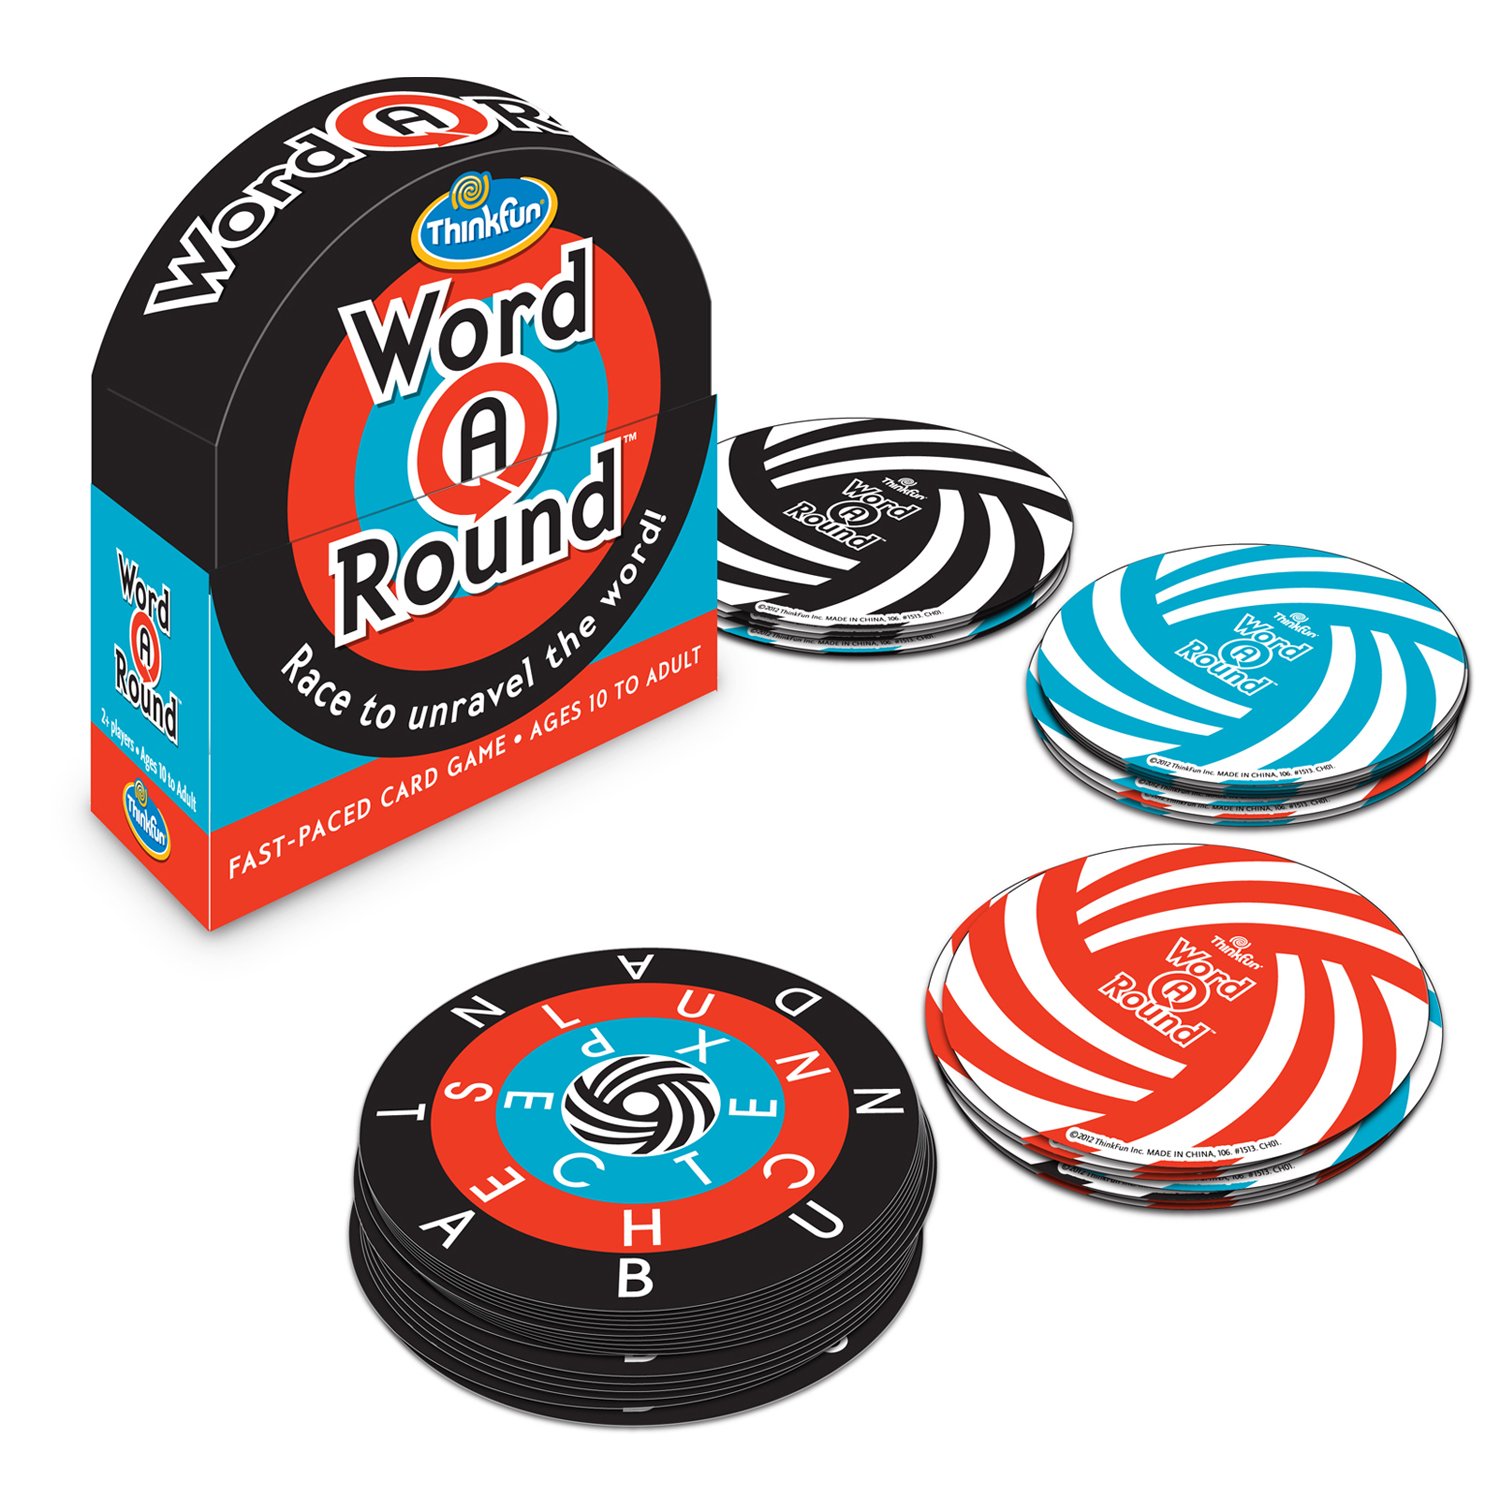 Book Cover Think Fun Word A Round Game - Award Winning Fun Card Game For Age 10 and Up Where You Race to Unravel the Word